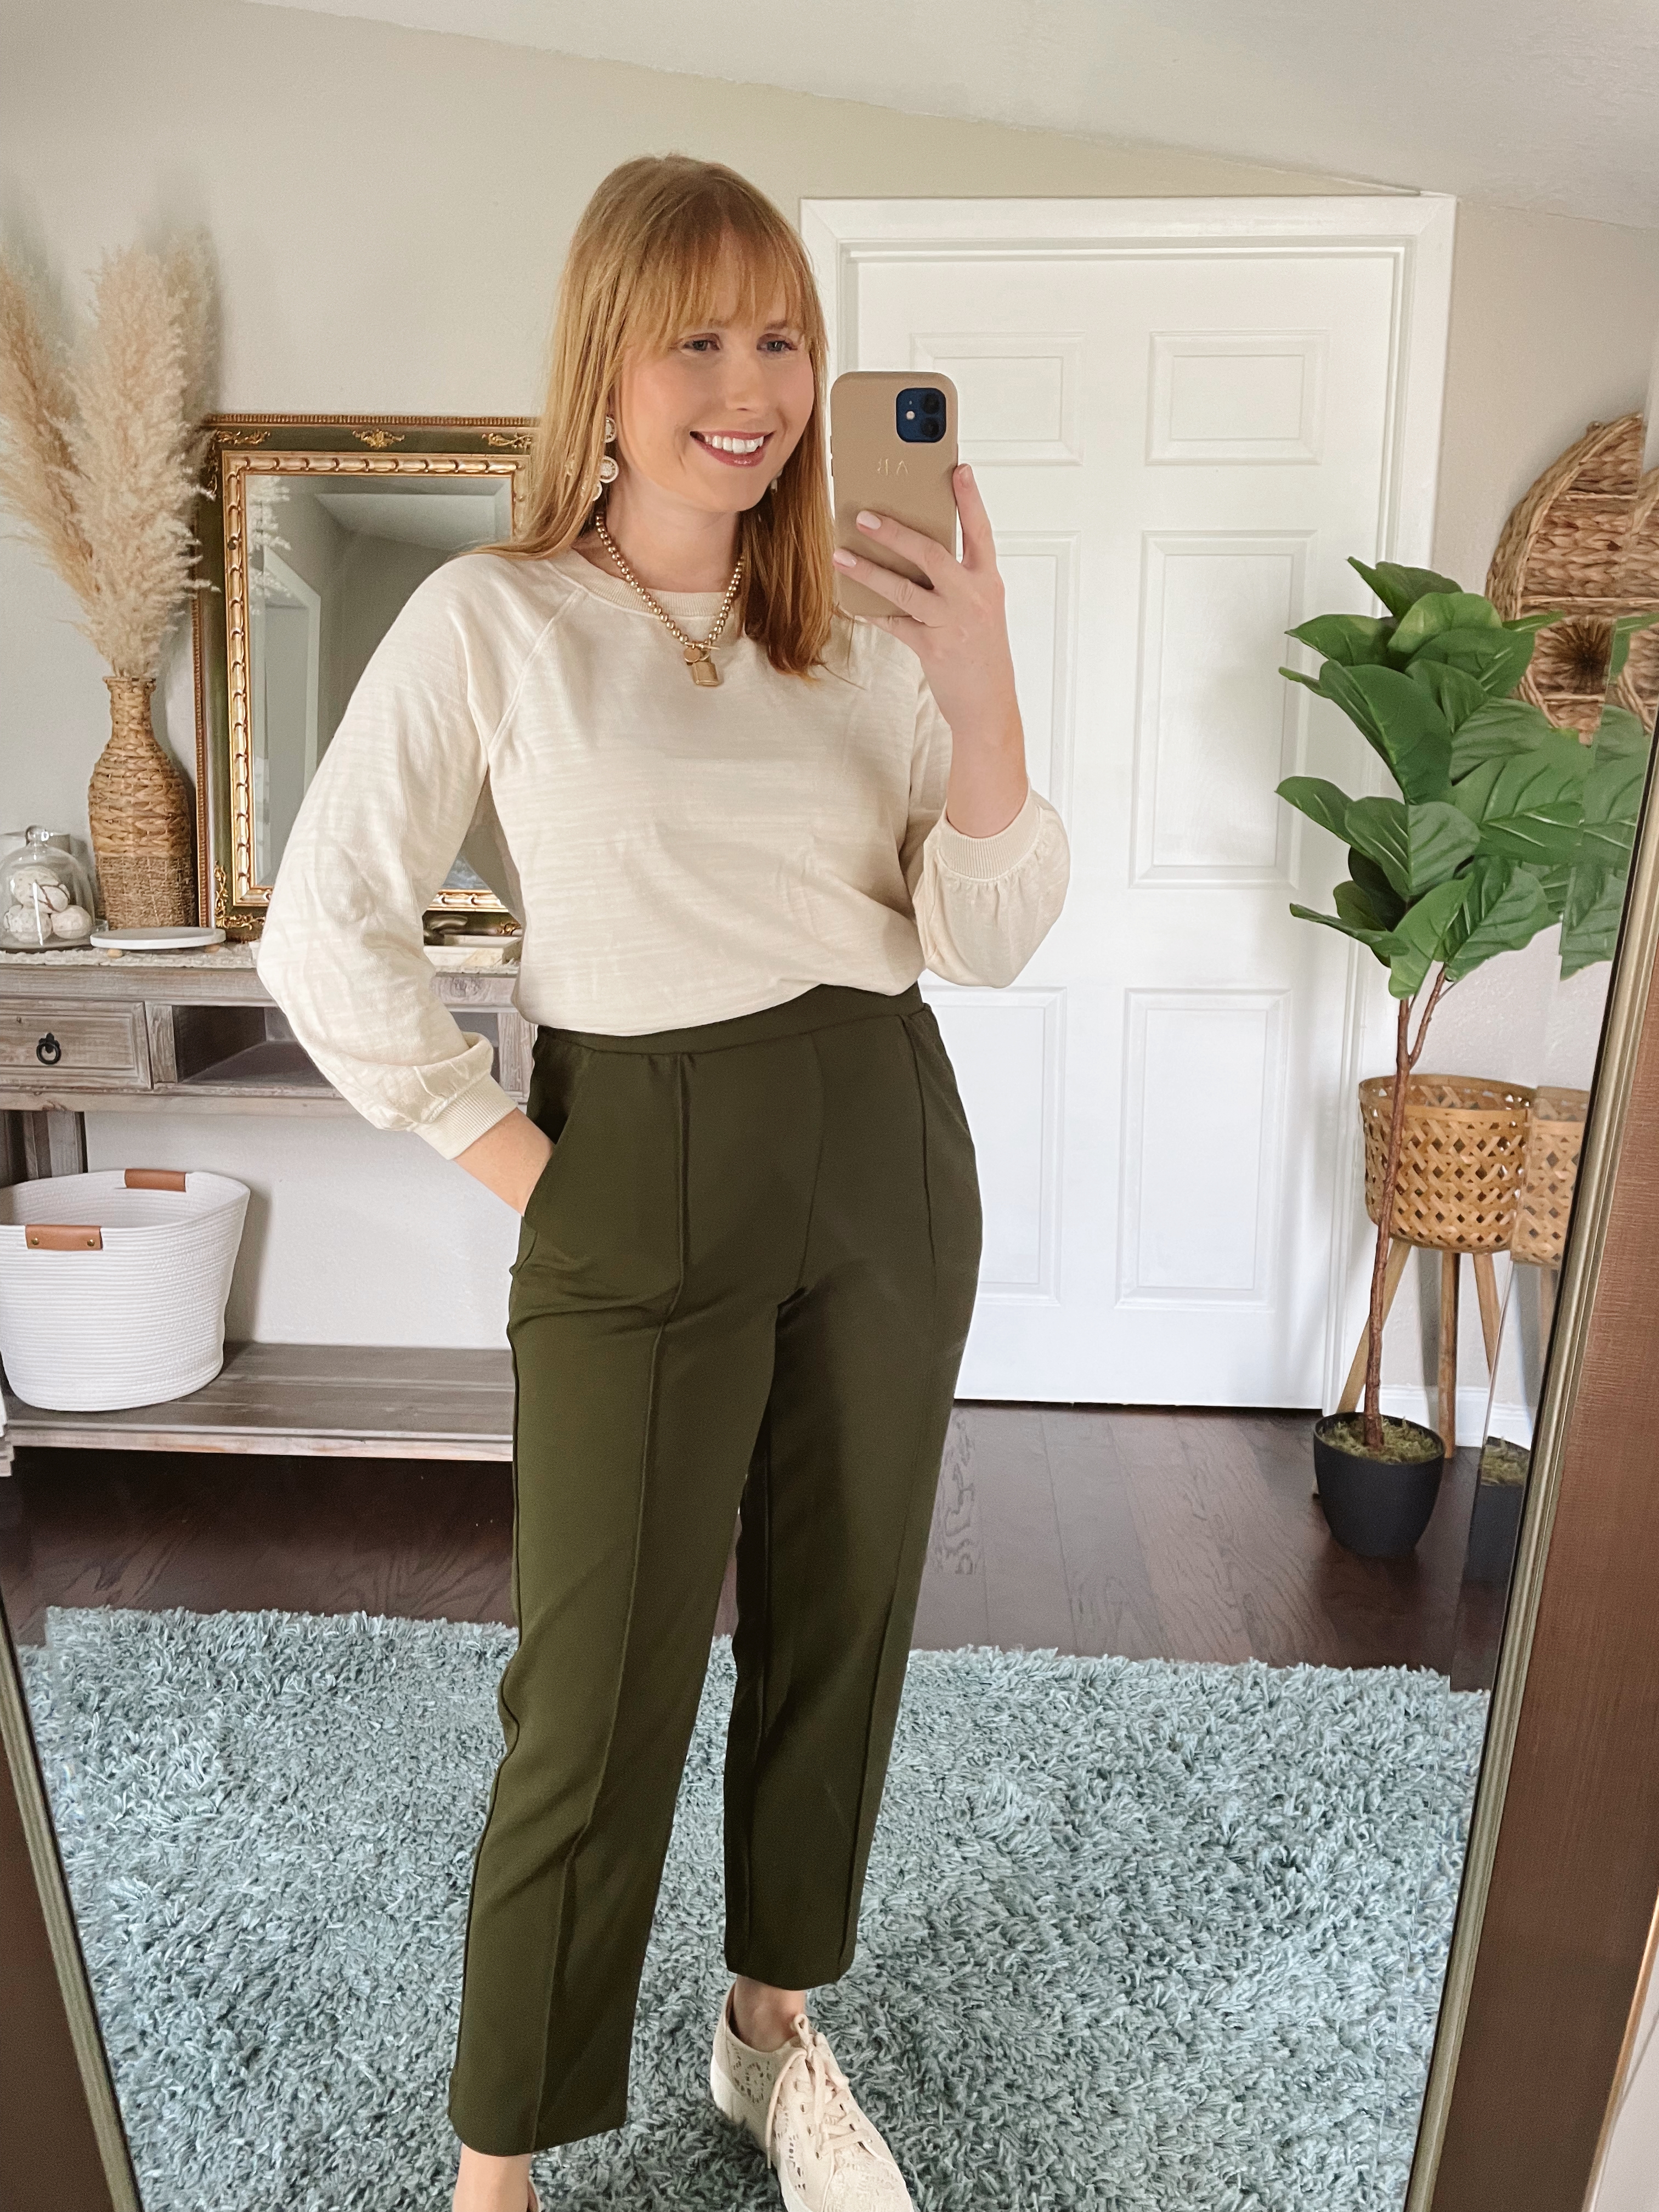 6 Stylish and Affordable Fall Outfit Ideas - Affordable by Amanda